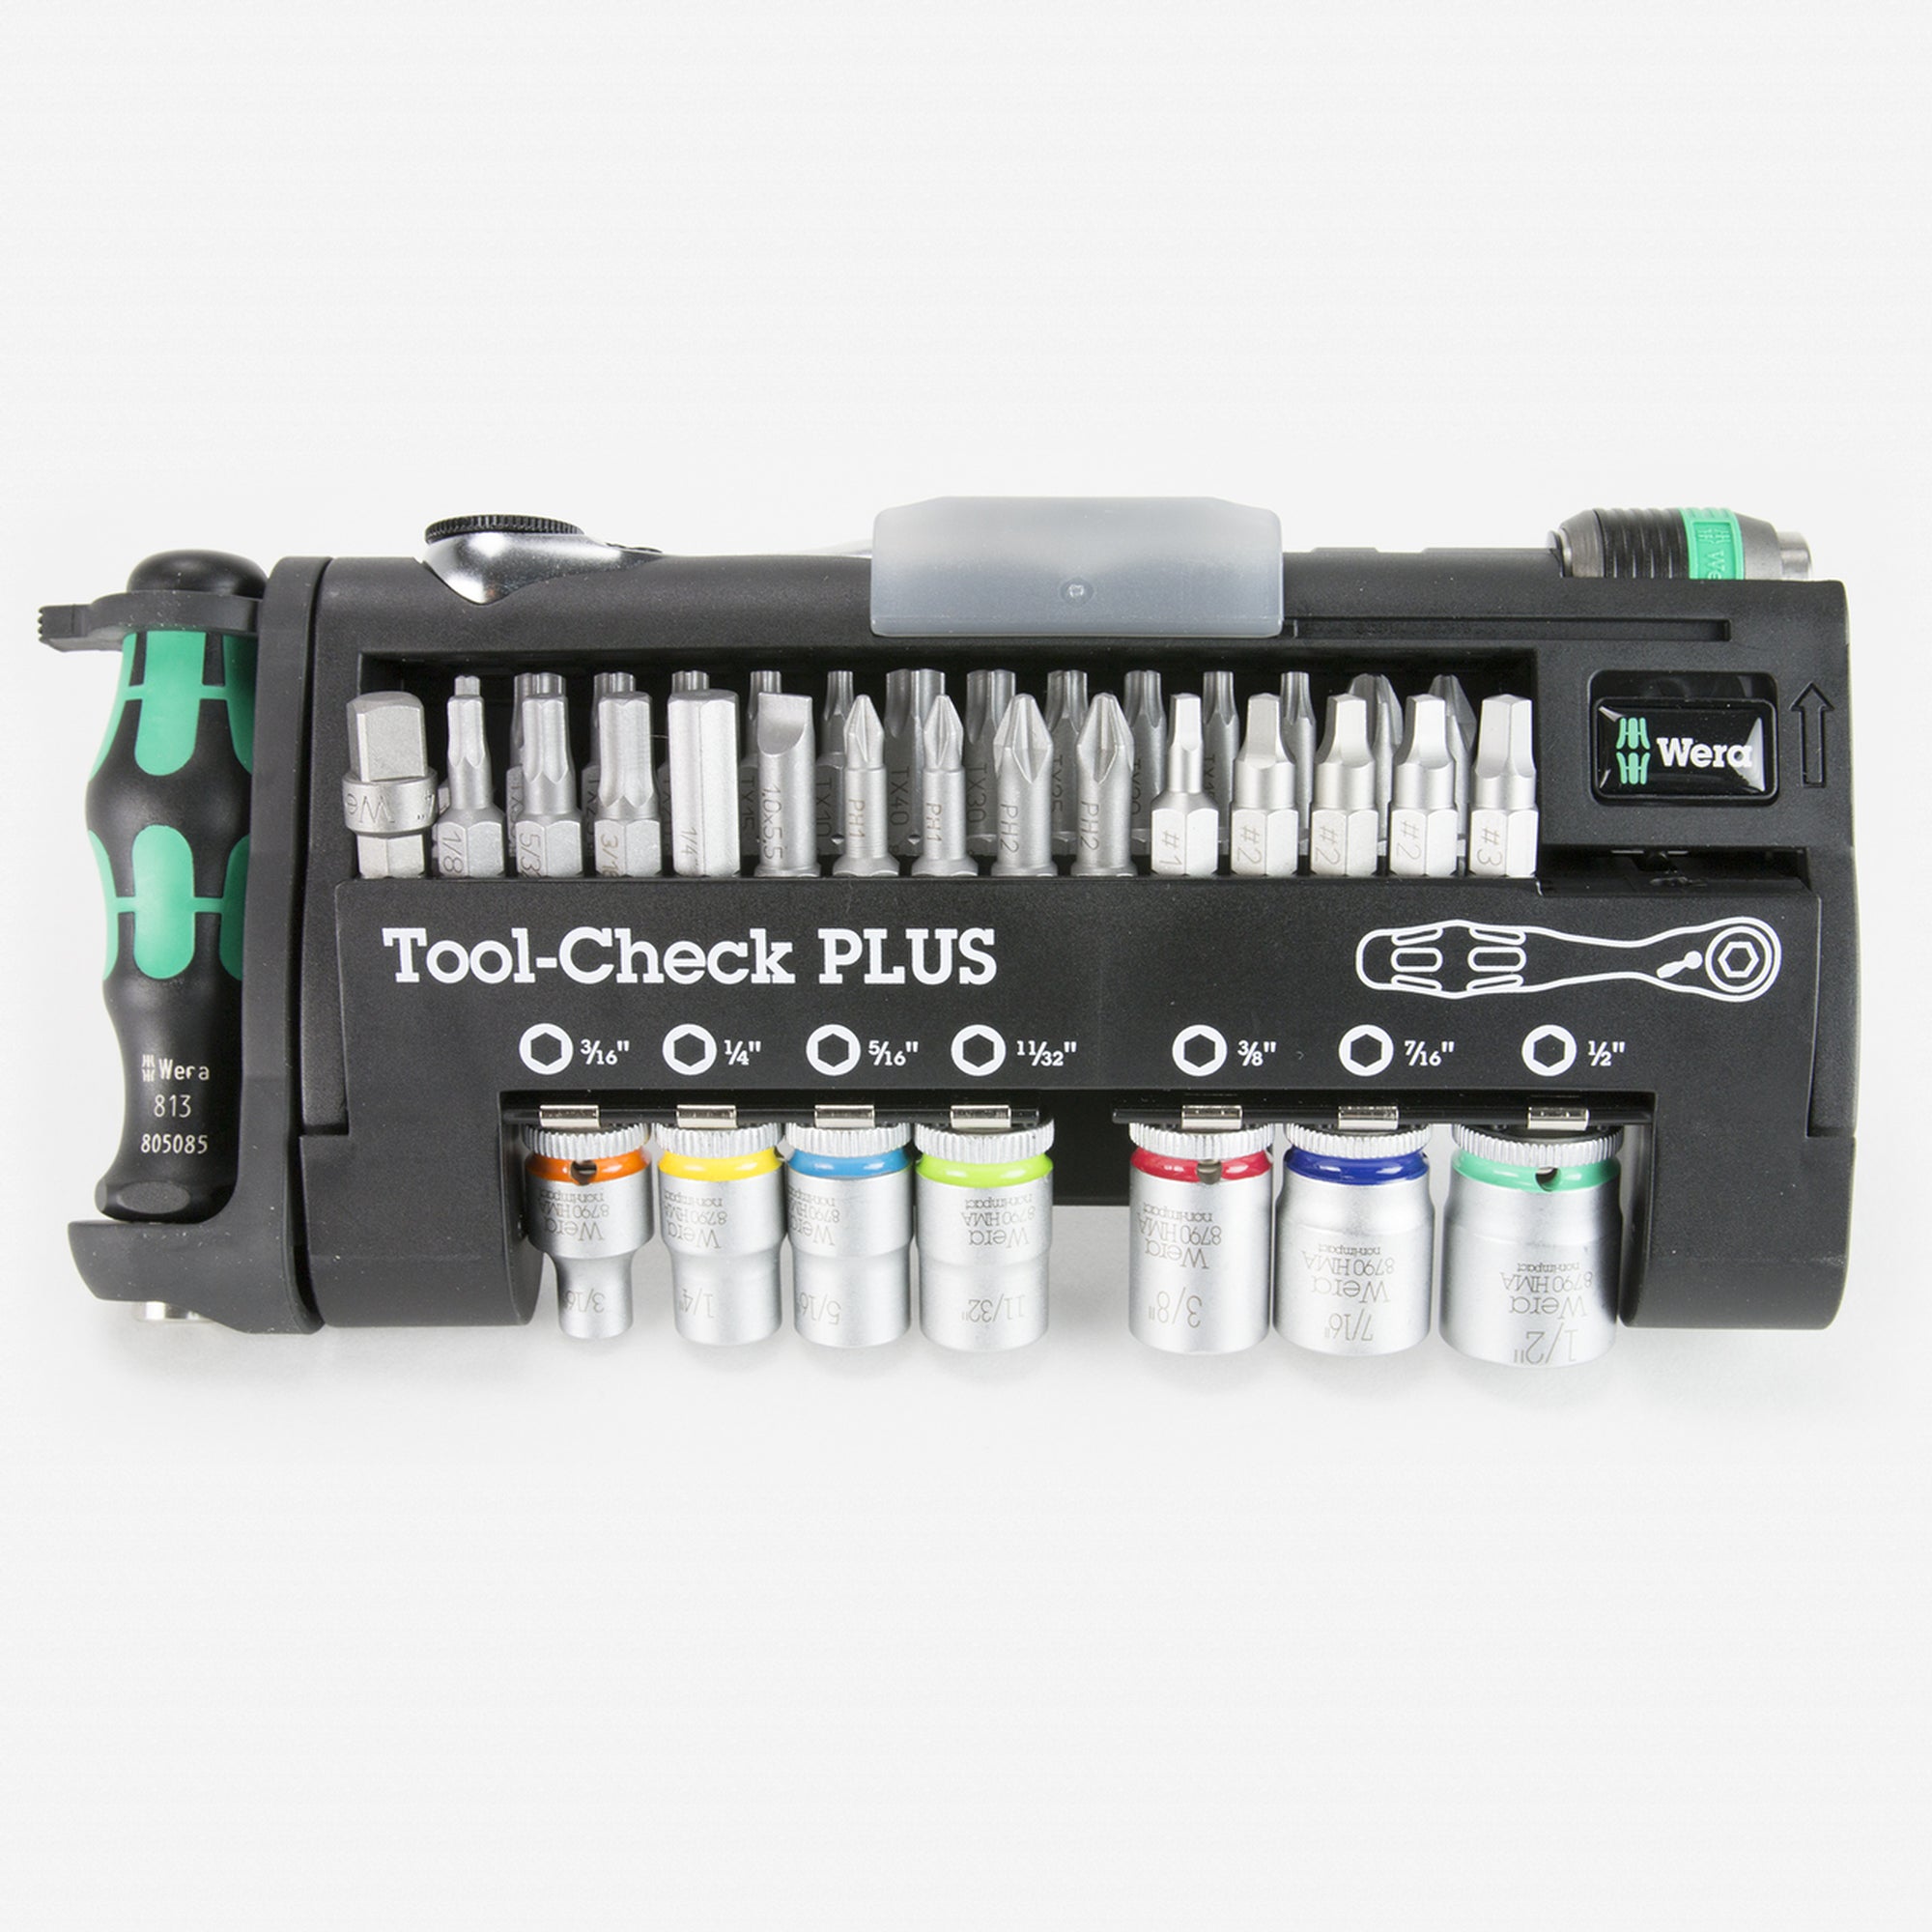 Wera 056491  -  Tool-Check Plus Bit Ratchet Set with Sockets - Imperial - wise-line-tools